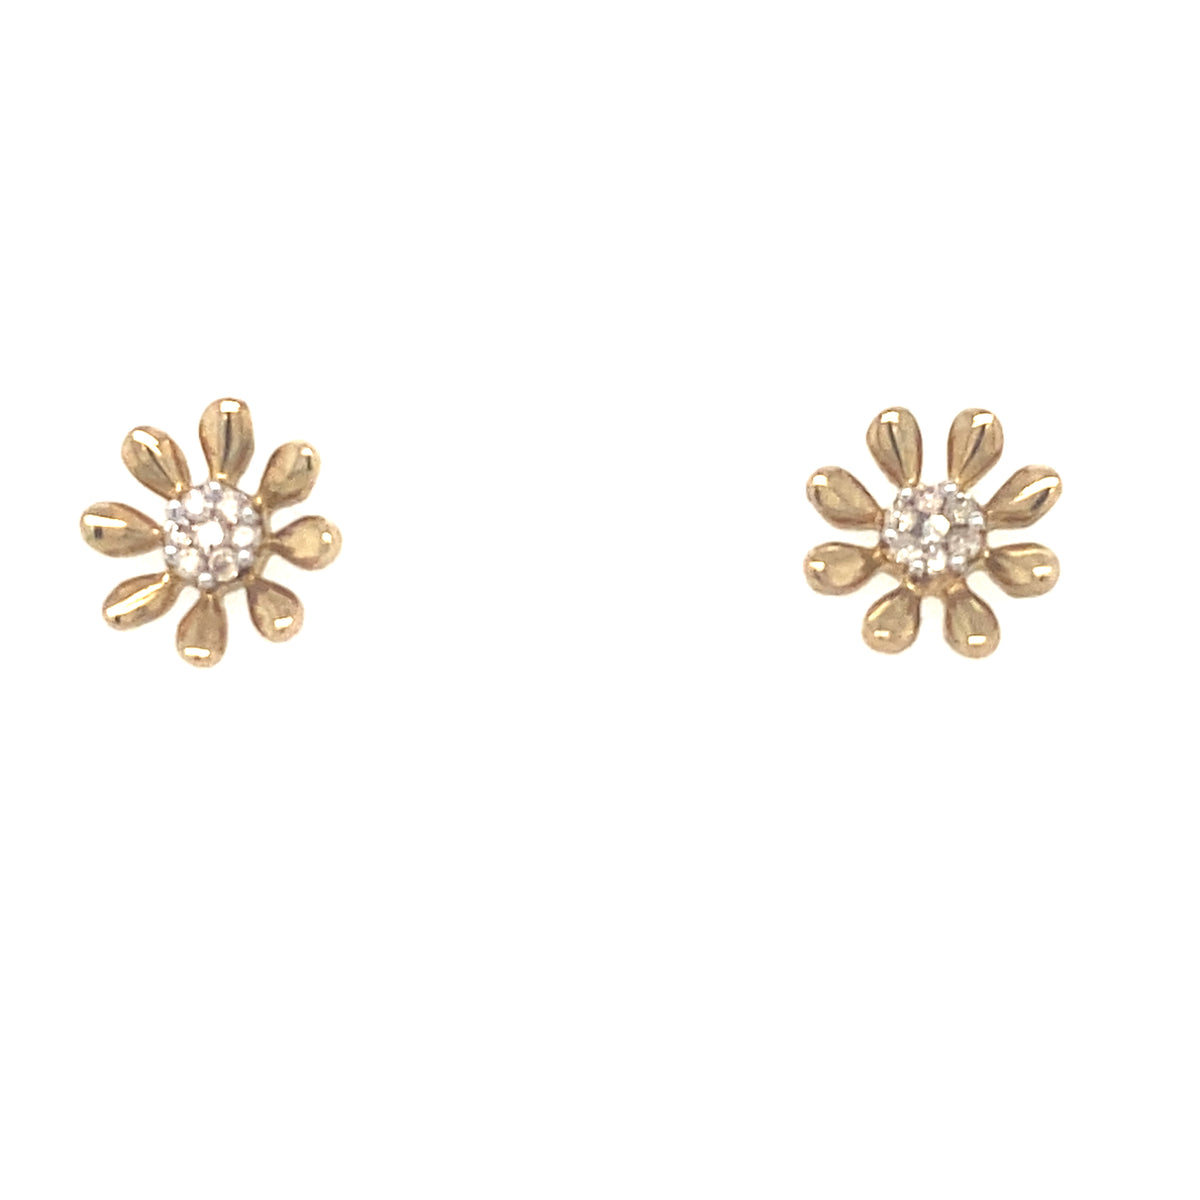 9kt Gold Flower Earrings with Real Diamonds